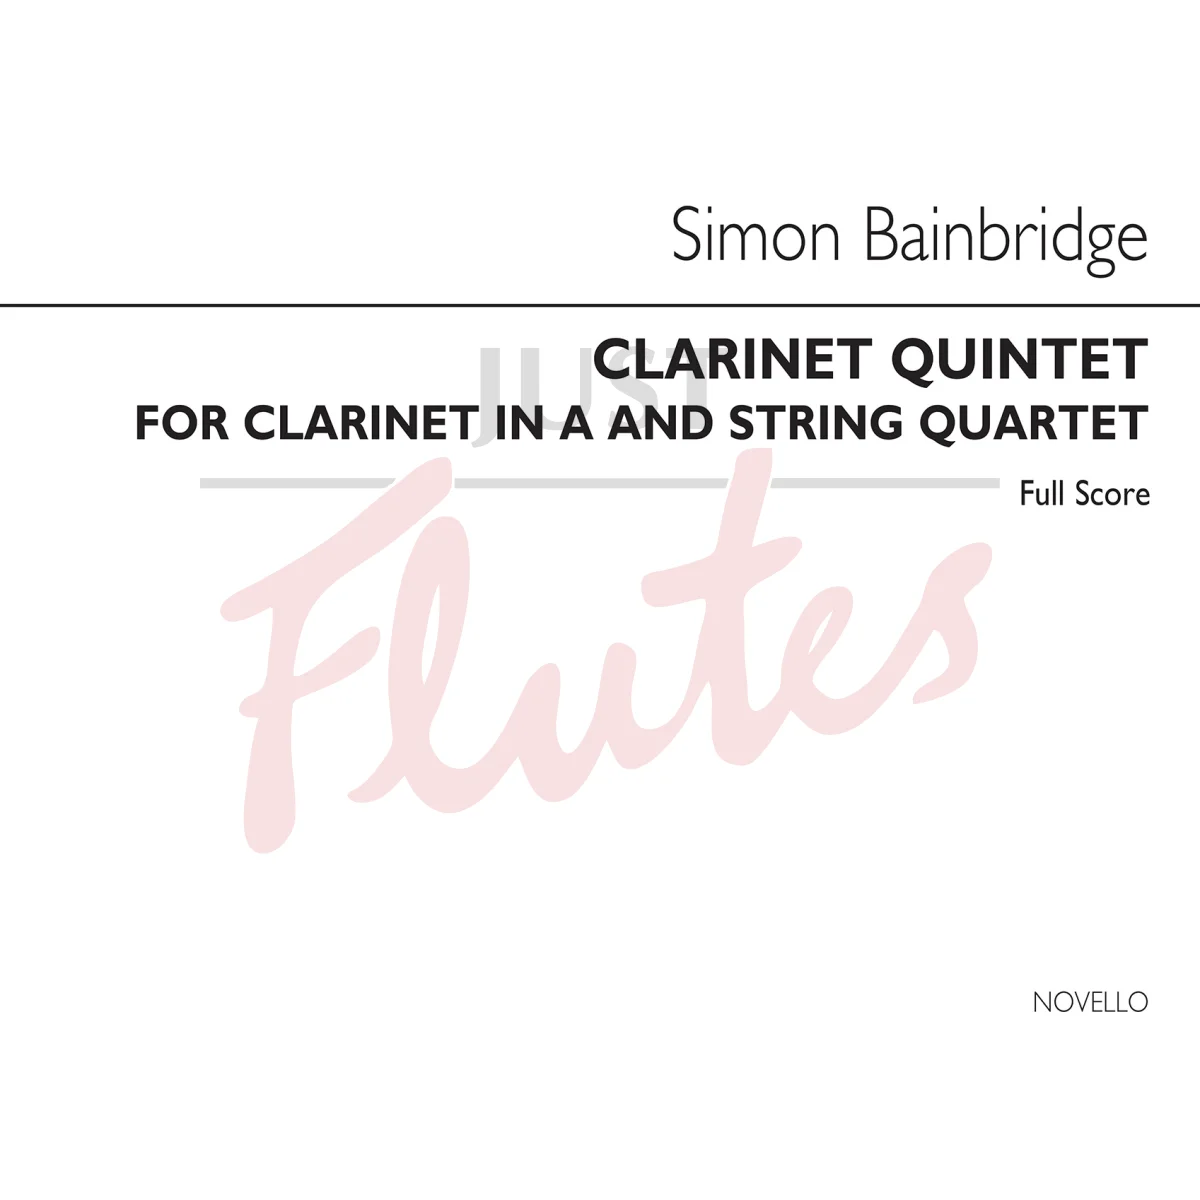 Clarinet Quintet for Clarinet in A and String Quartet